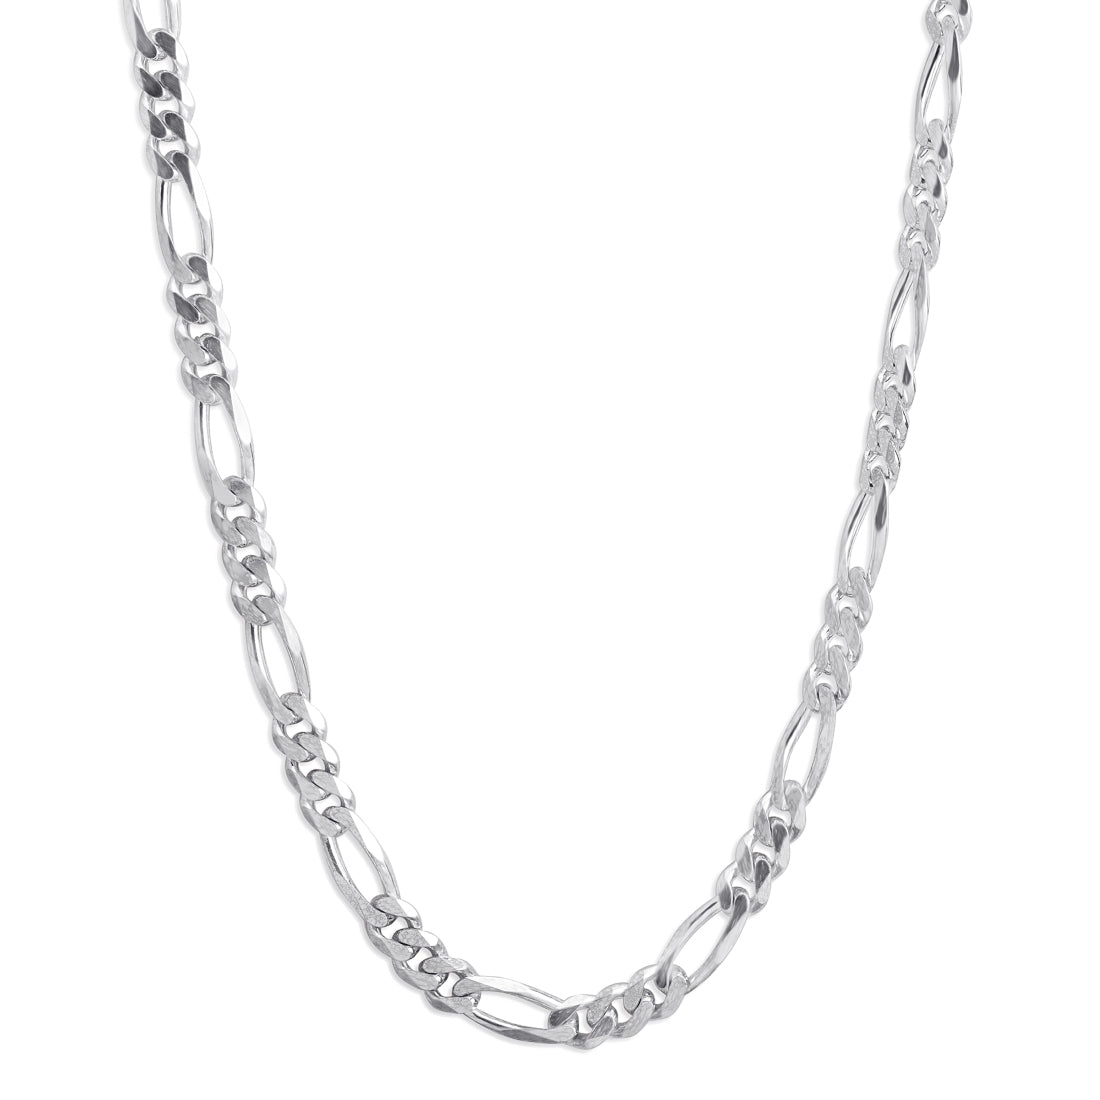 Refined Links Rhodium Plated 925 Sterling Silver Men's Chain